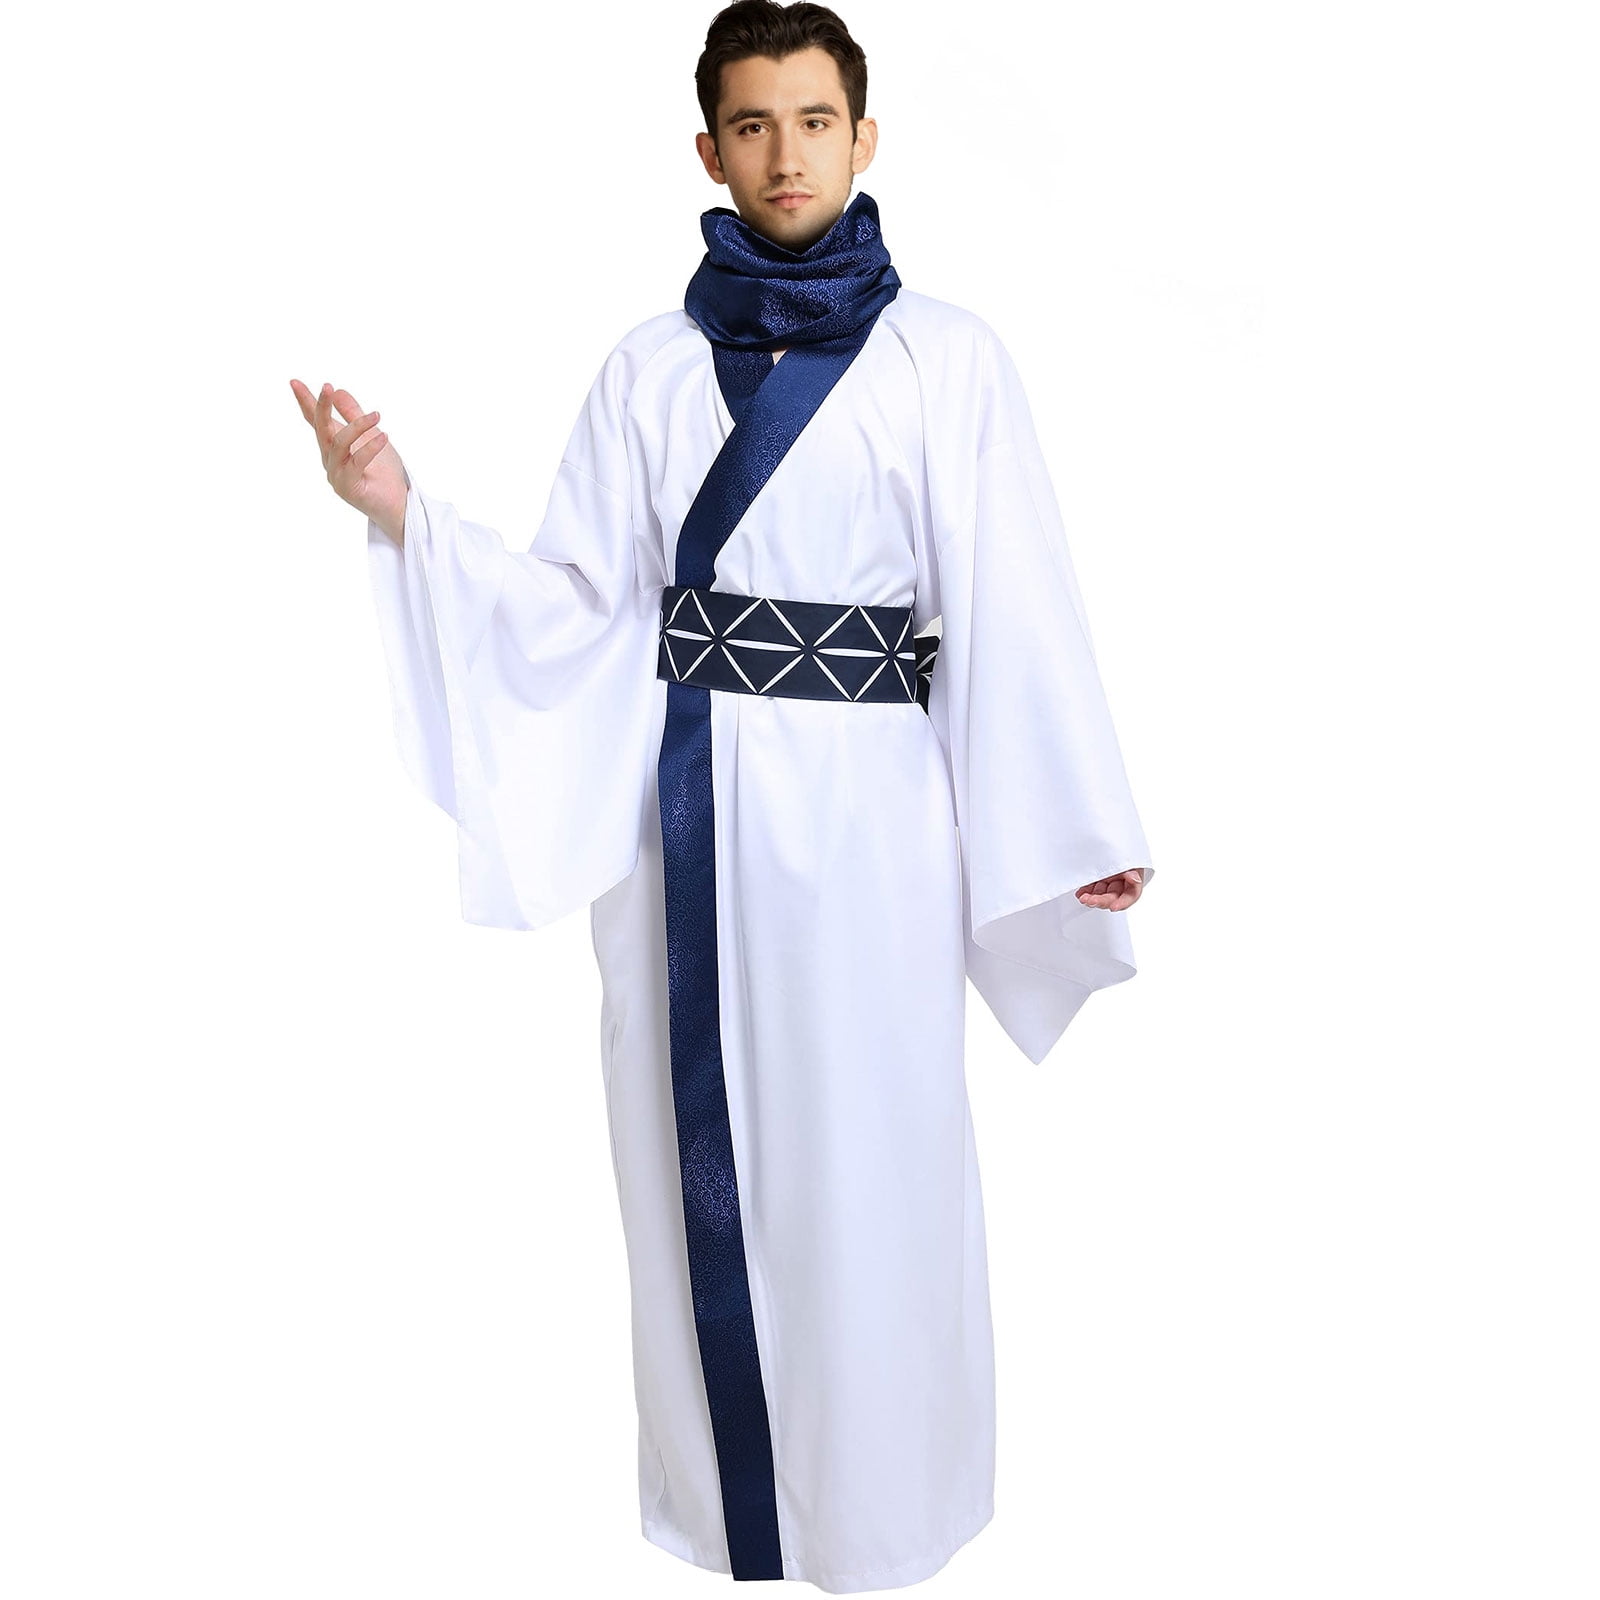 No Category  Cosplay  Anime Mens  Page 1  Imaginations Costume   Dance